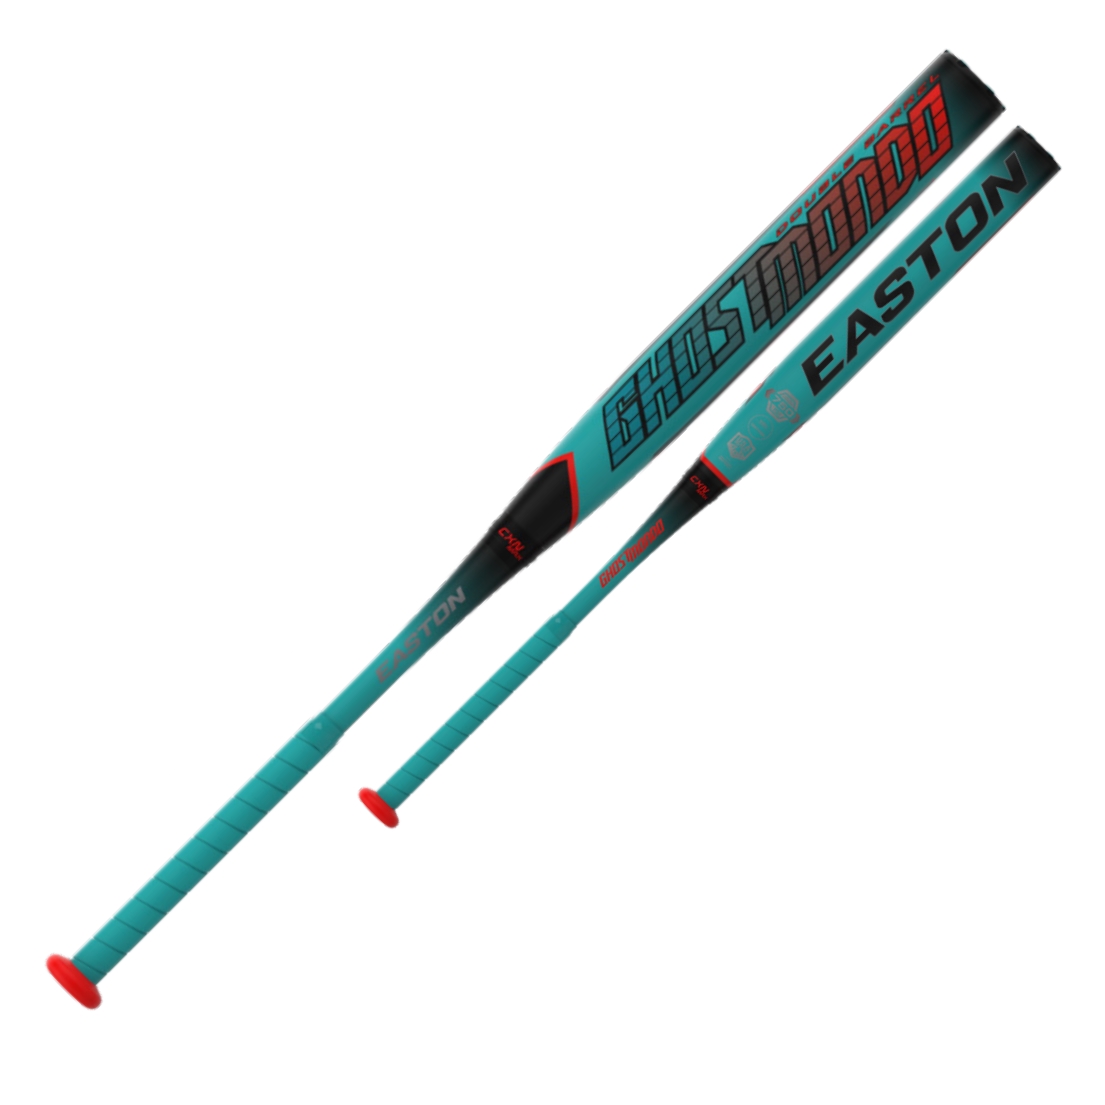 easton-ghostmondo-ext-12-5-load-usa-softball-bat-34-inch-27-oz SP22GHML-3427 Easton 628412361580 Double Barrel Technology – Delivers soft barrel compression and hot performance